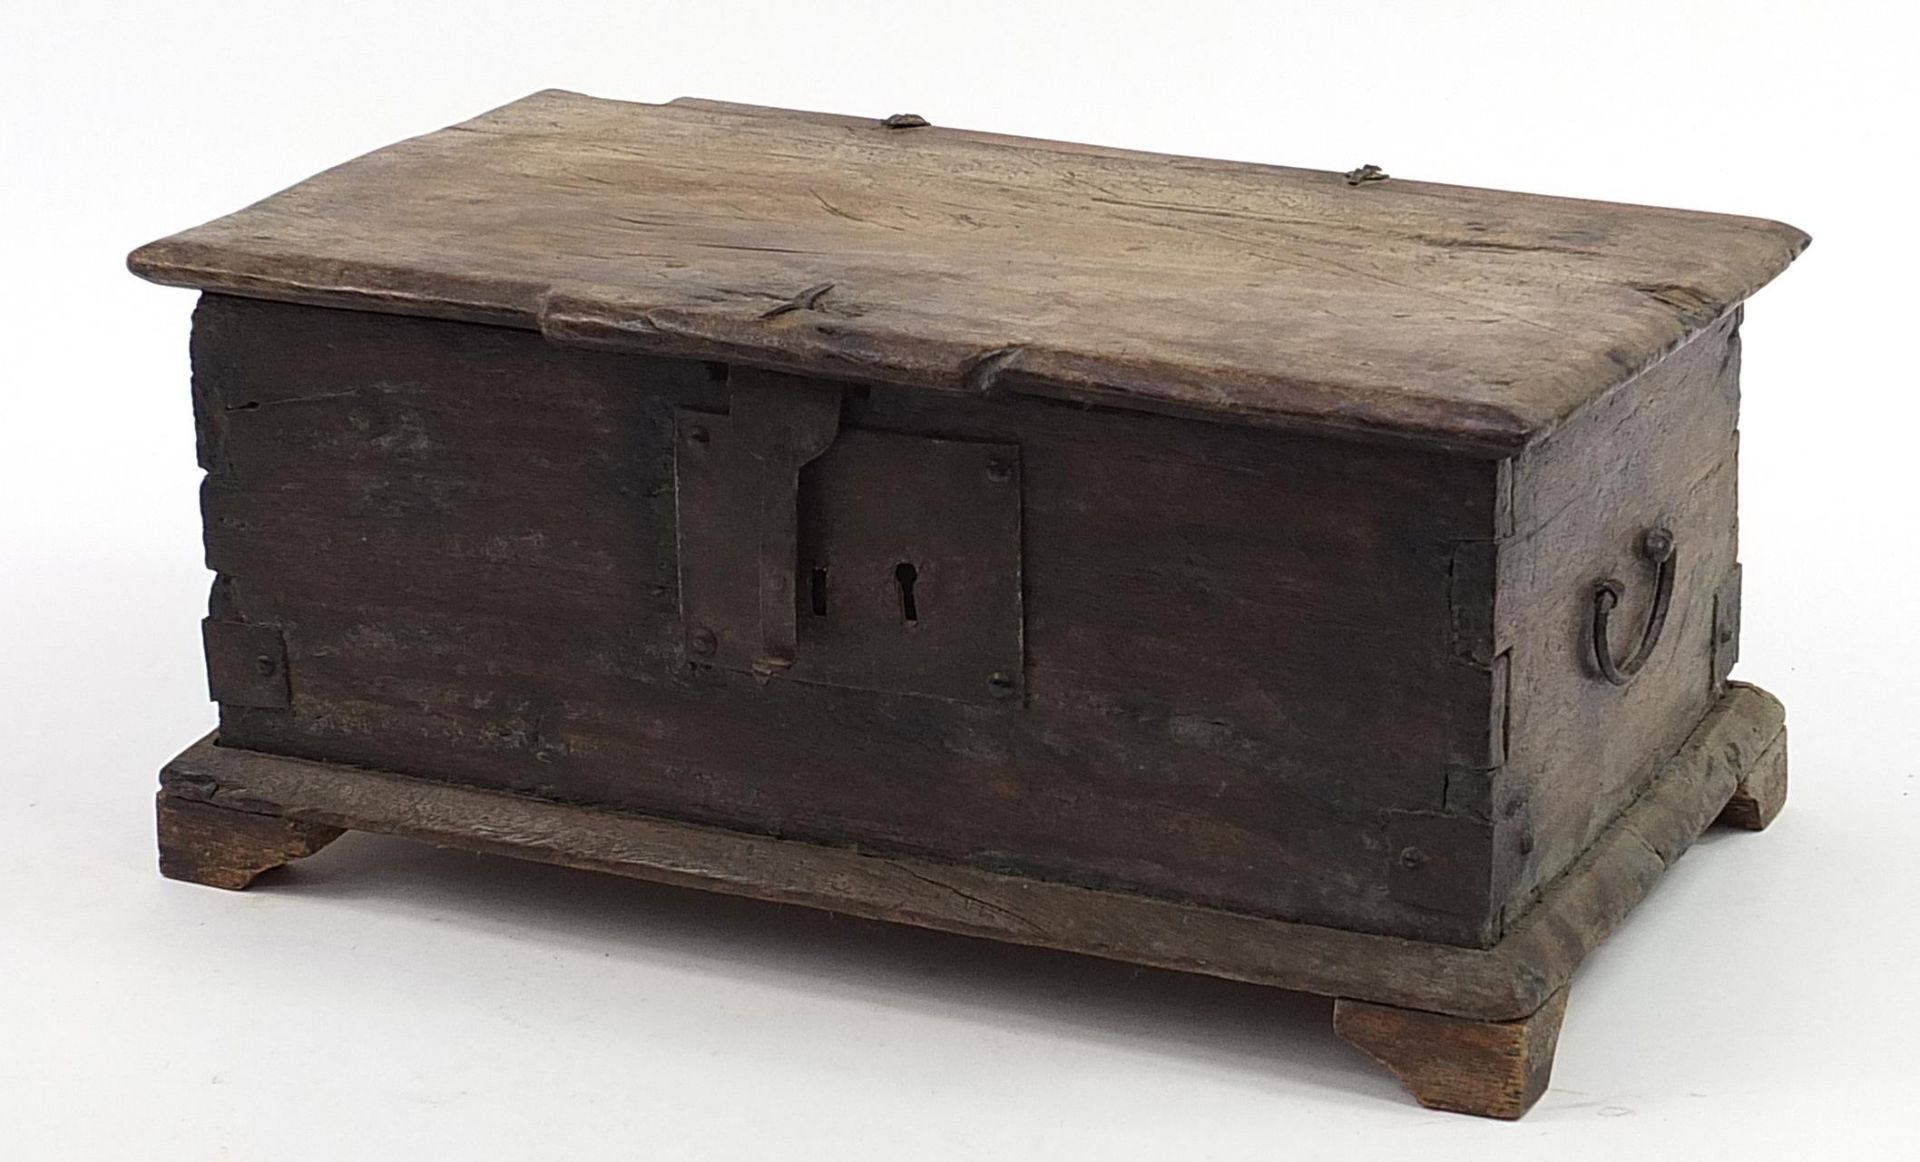 17th/18th century oak casket with iron carrying handles and pin hinges, 21.5cm H x 48.5cm W x 28.5cm